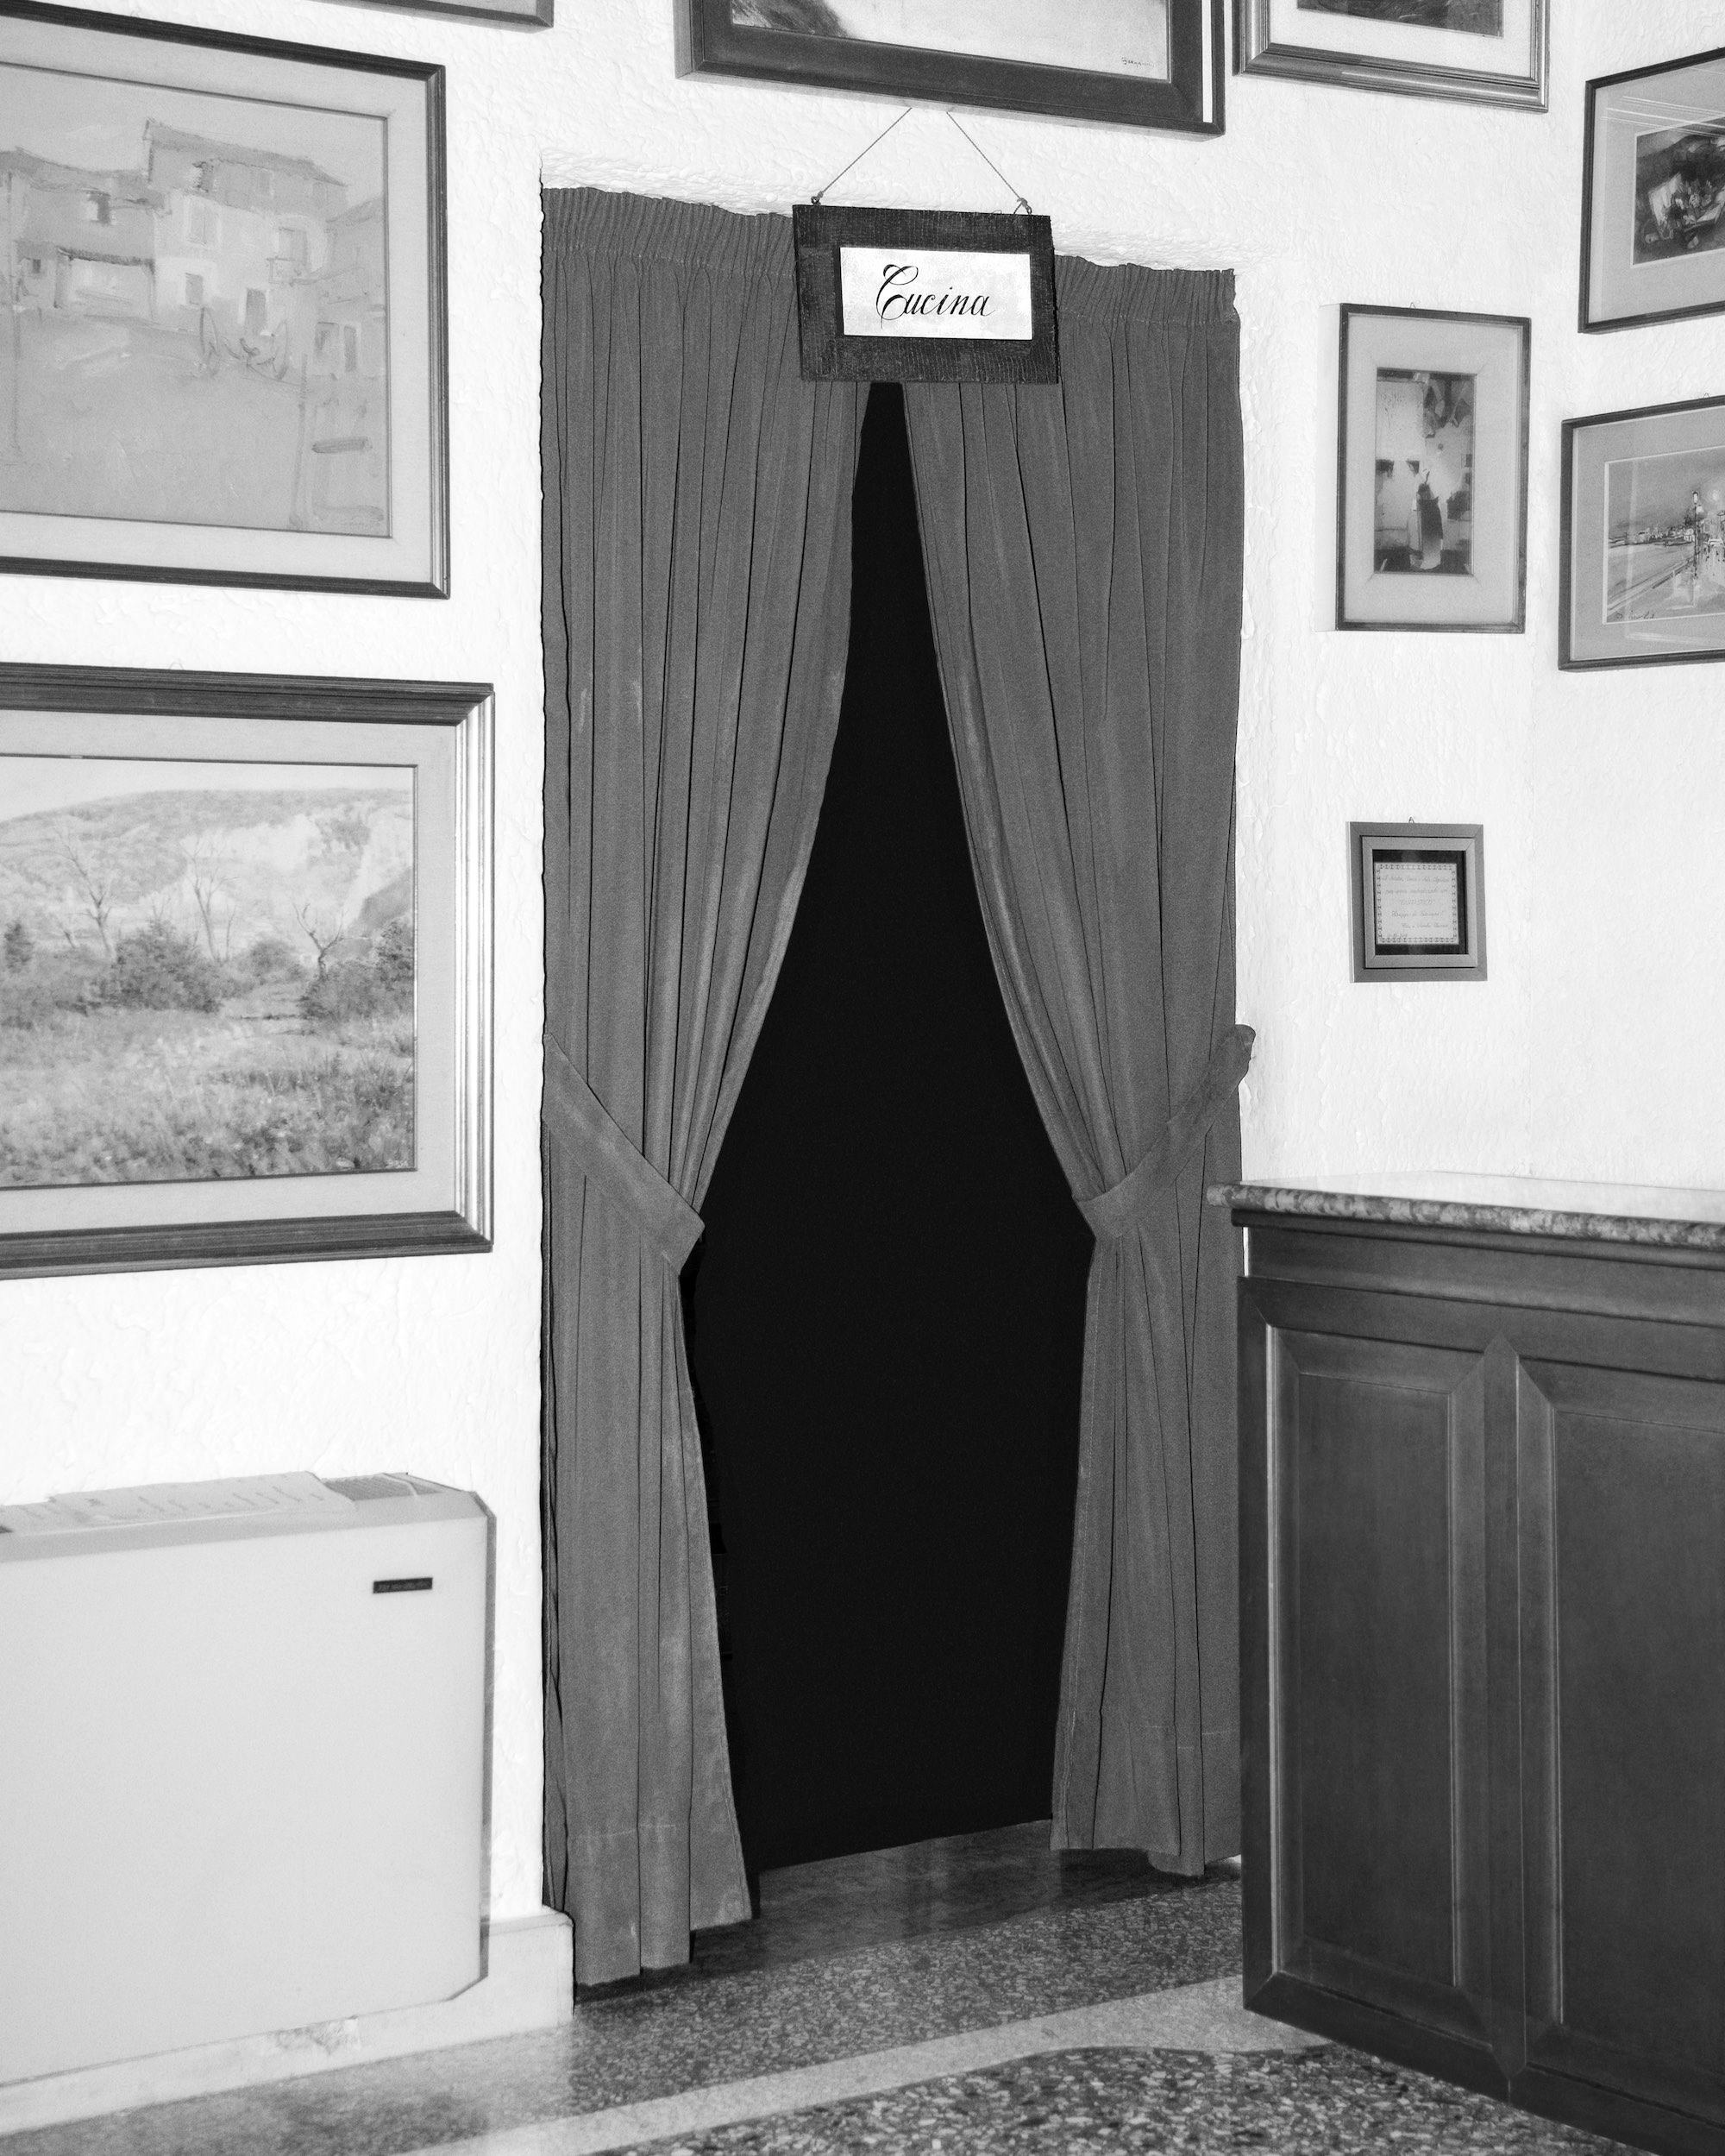 Black and white image of a doorway, framed by curtains, marked by a sign reading 'Cucina' The walls around are framed with various paintings and photographs in frames. © Eleonora Agostini